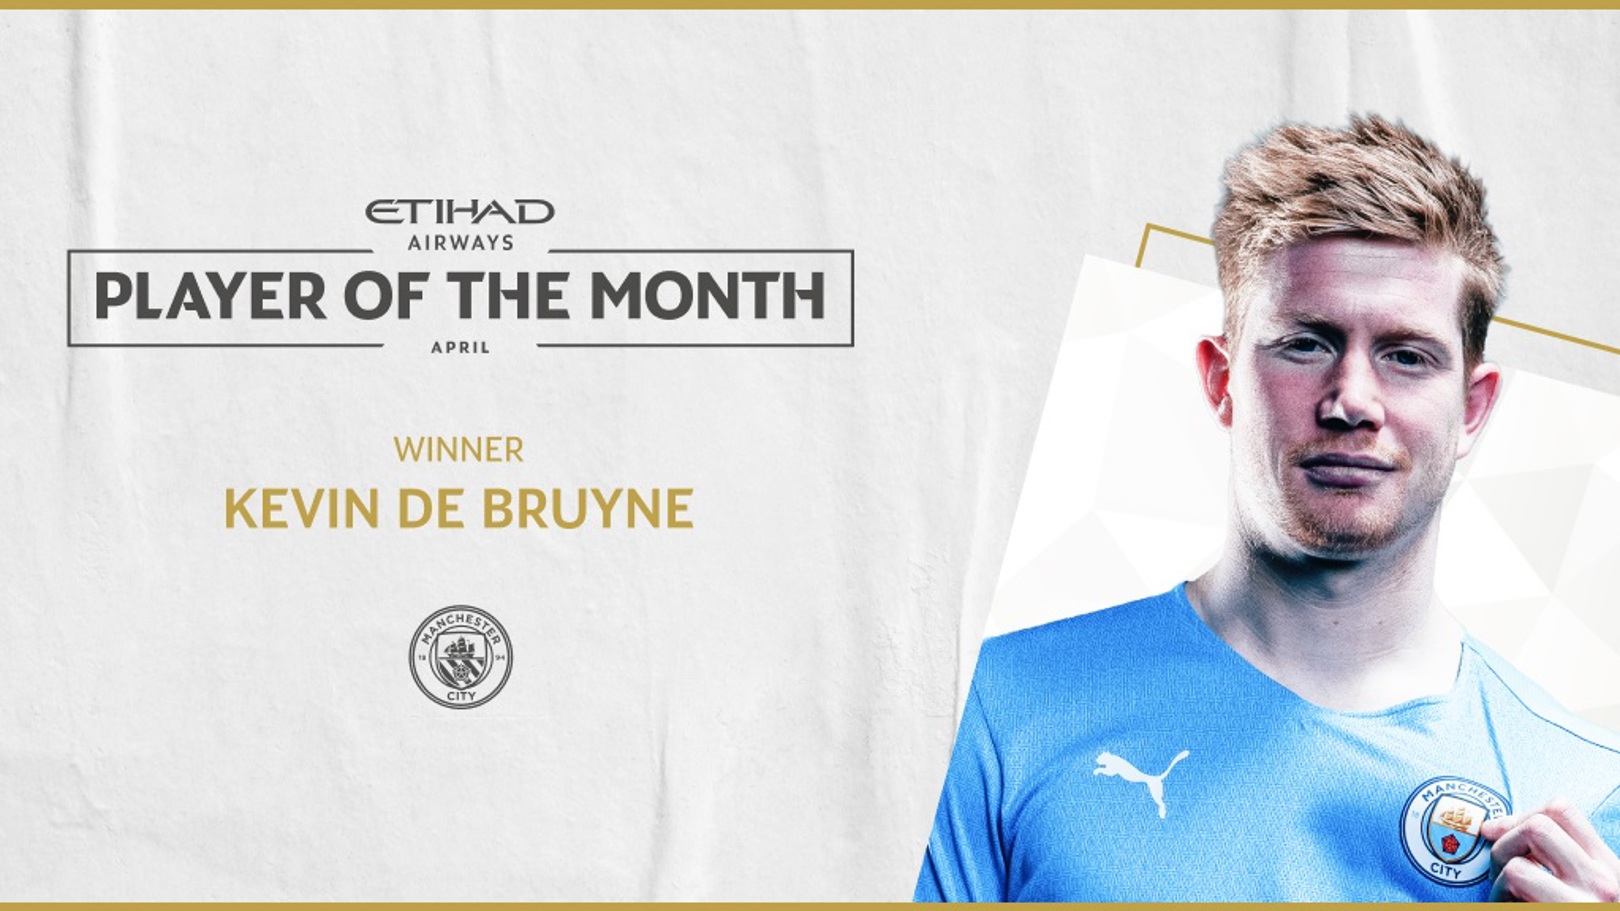 De Bruyne edges out Jesus to win Etihad prize 